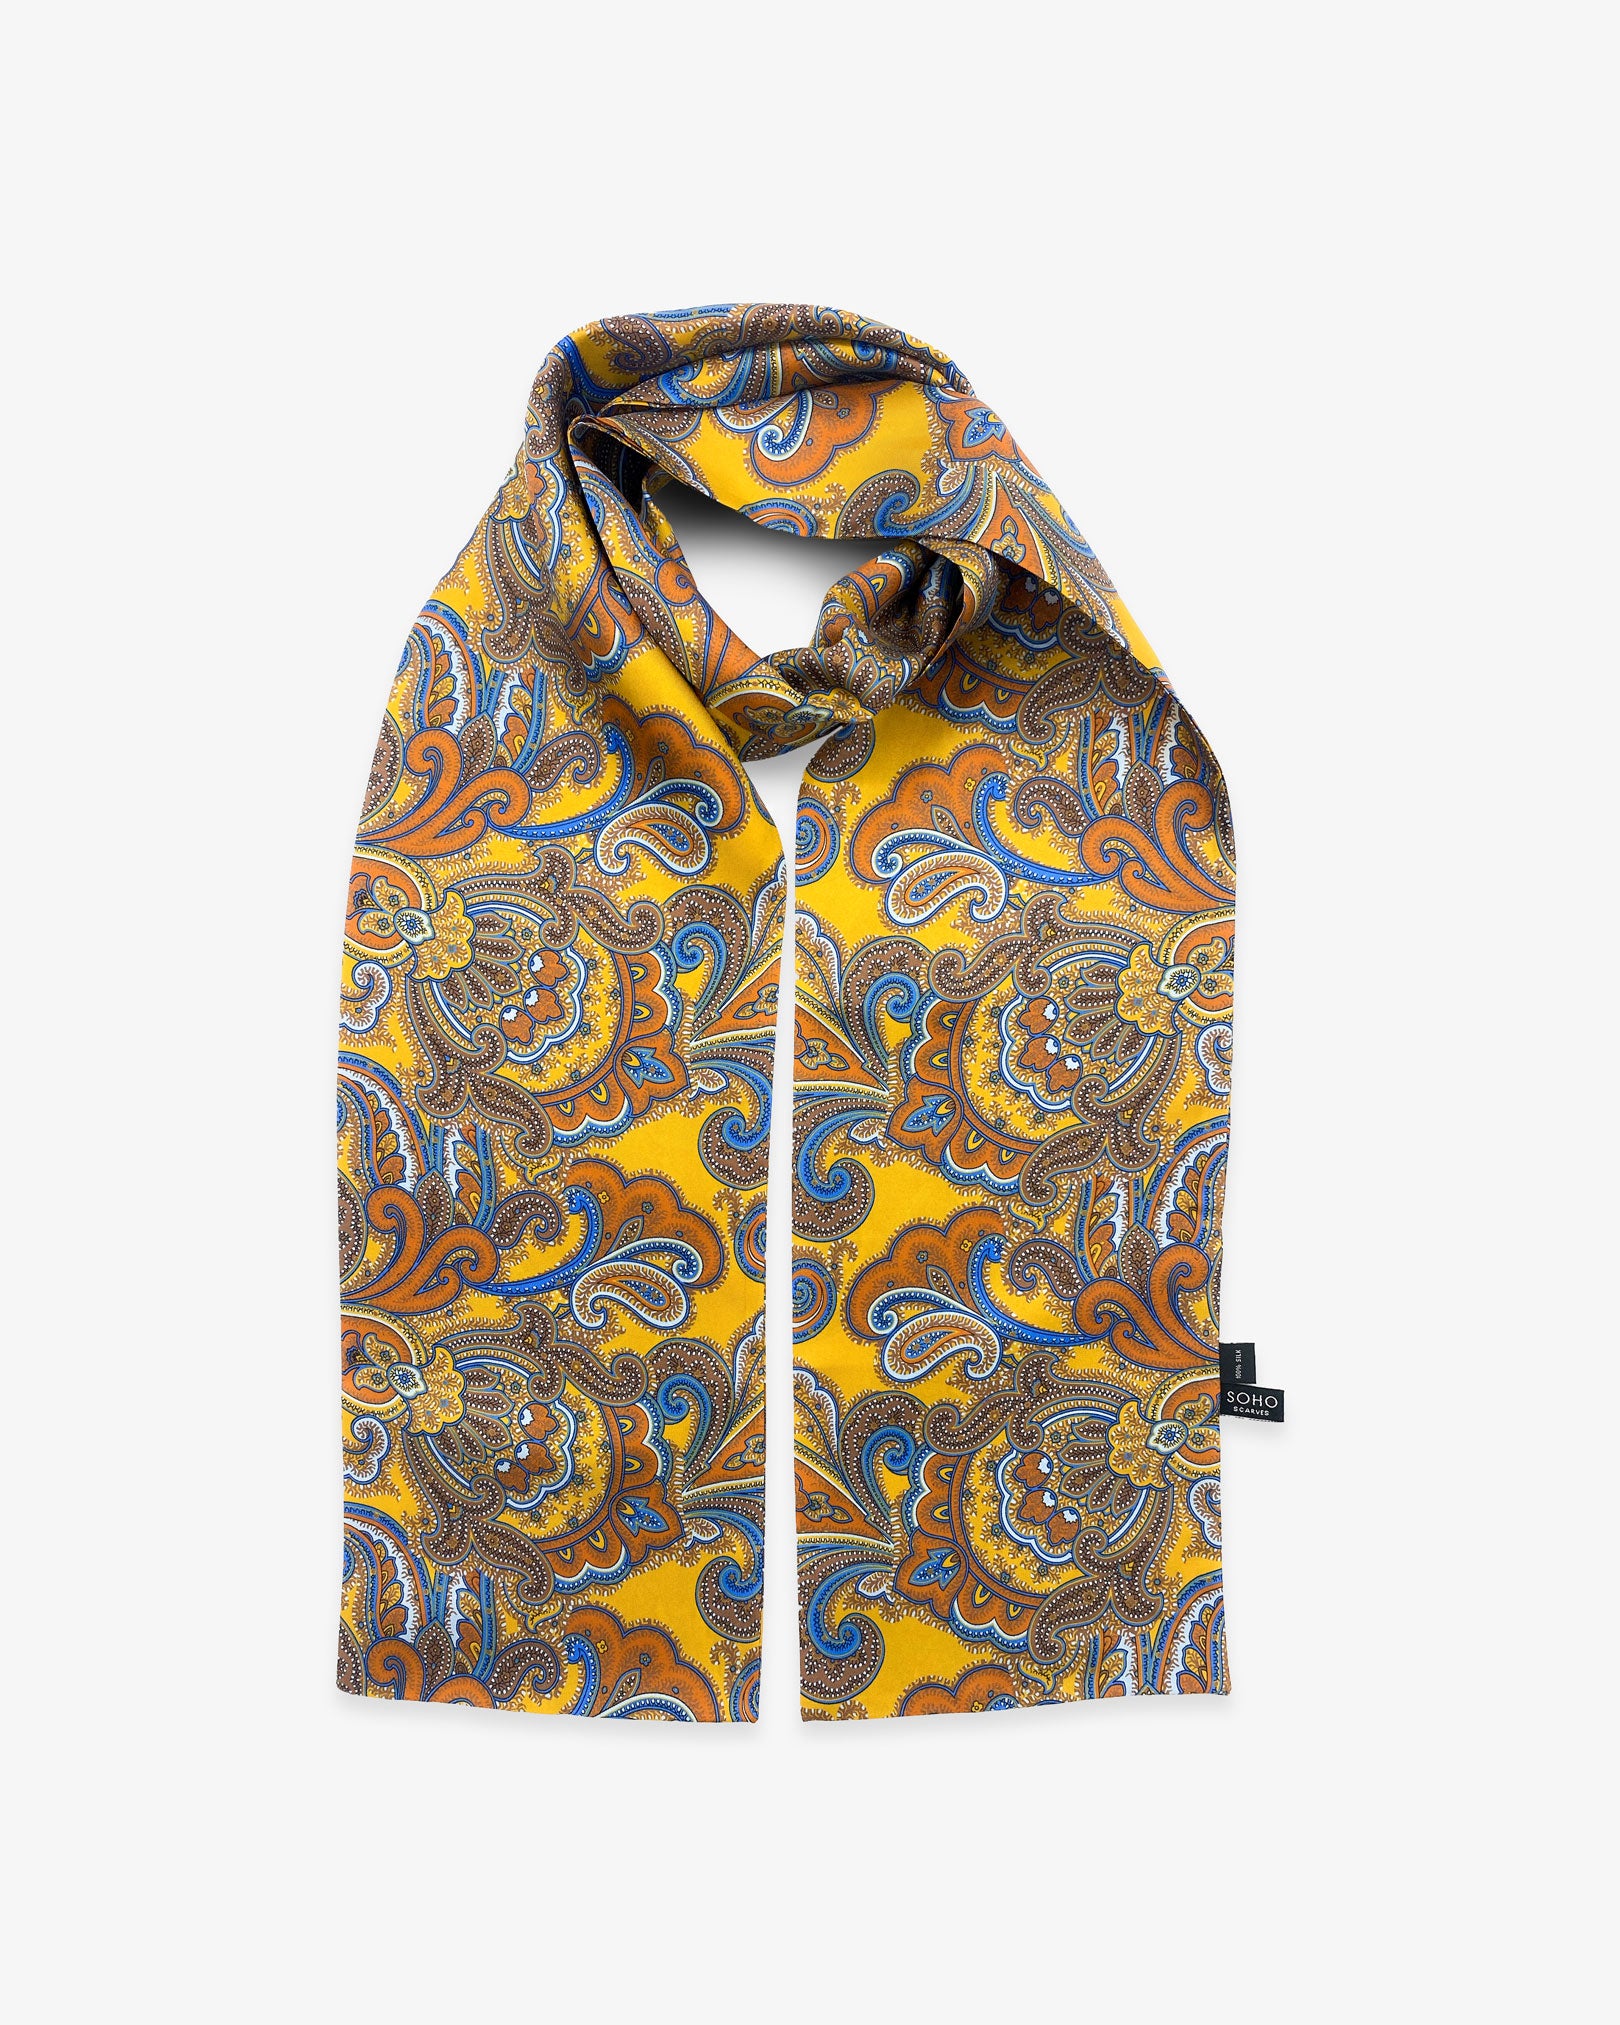 Looped view of the 'Carnaby' silk scarf, clearly showing the golden yellow fabric with vibrant orange, brown and blue paisley patterns and a matching 3-inch fringe.